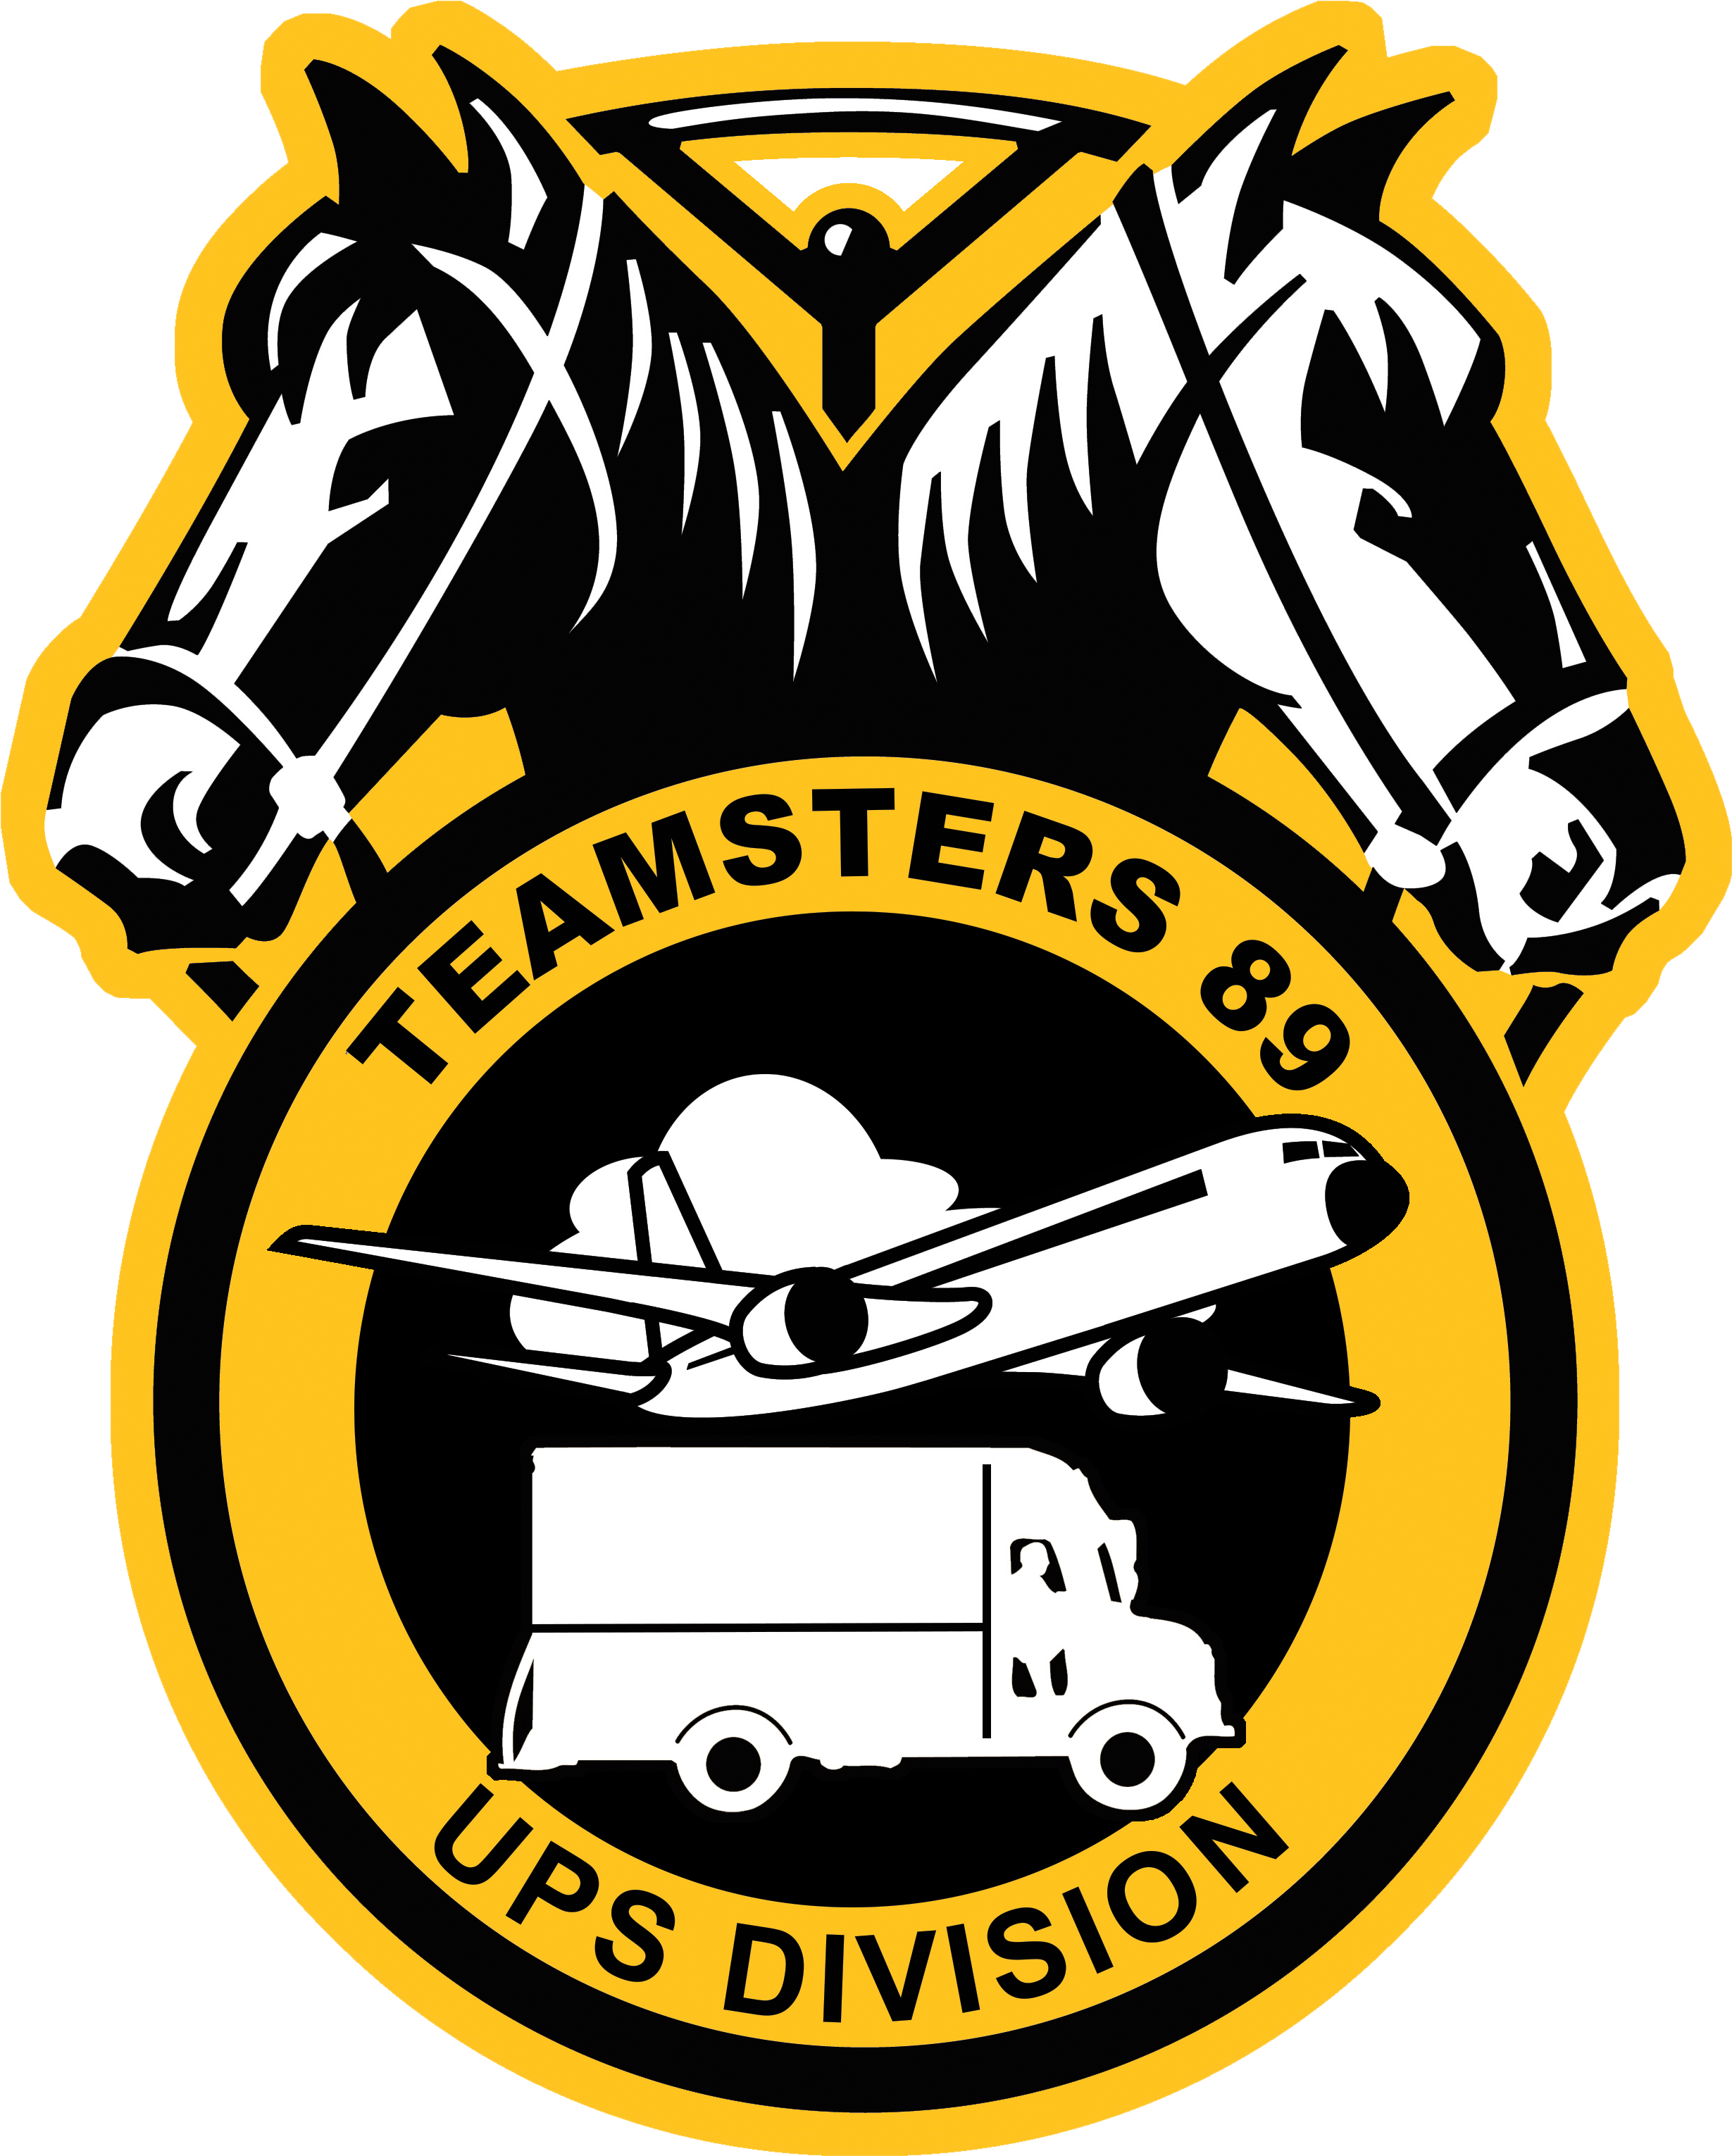 Ups Is An International Corporation Specializing In - International Brotherhood Of Teamsters (2490x3097)